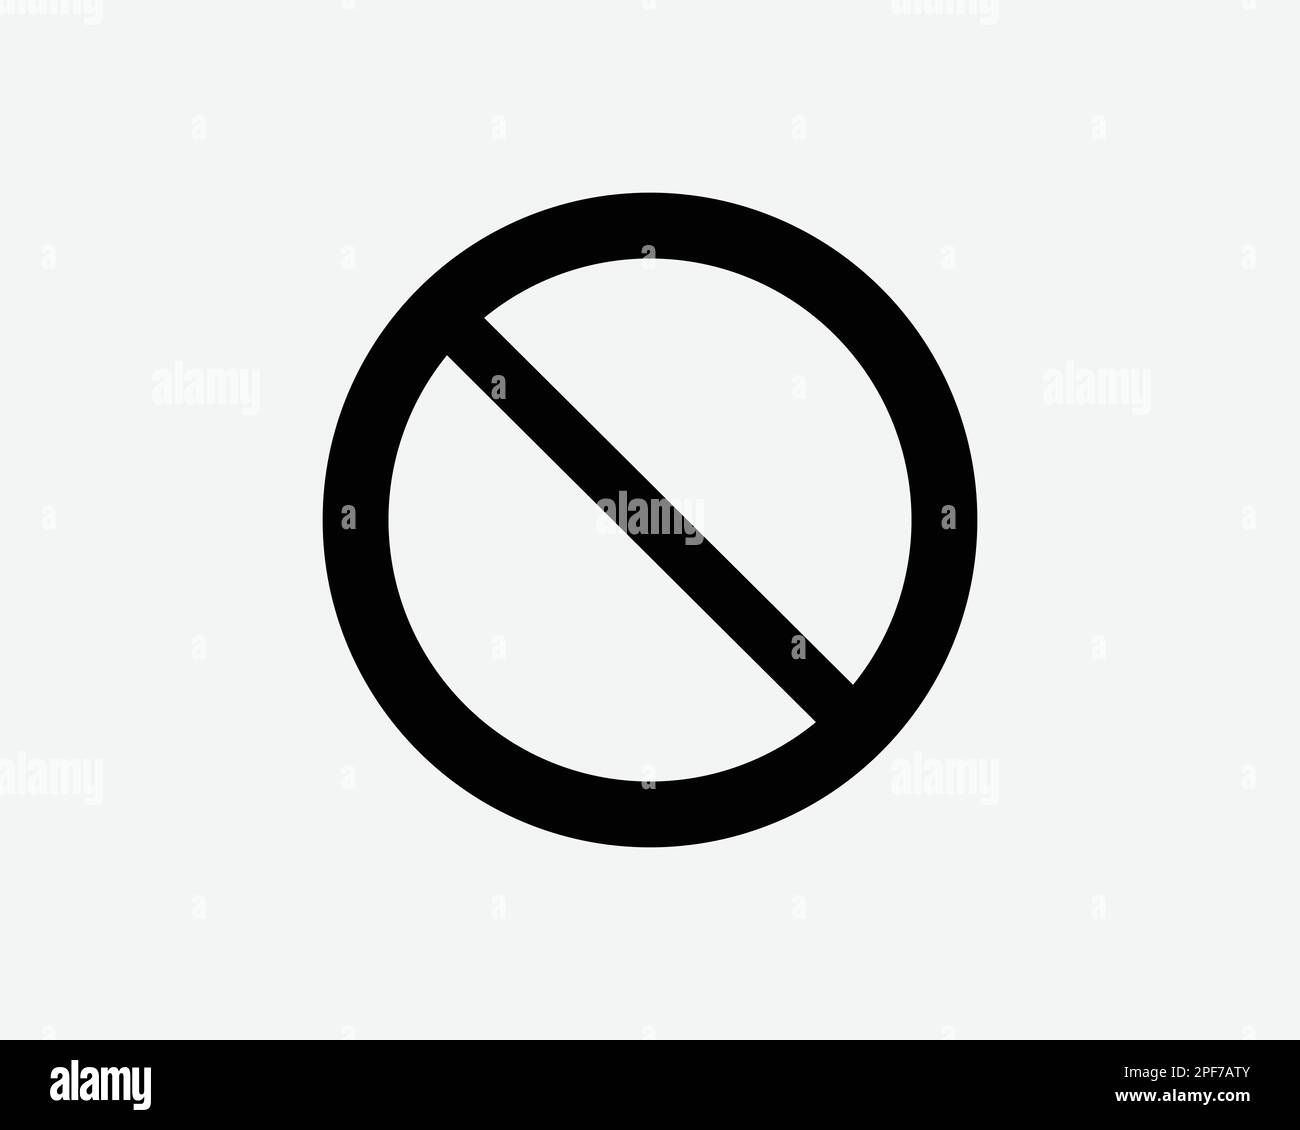 Prohibition Sign Do Not Allowed Cannot Prohibited Empty Black White Silhouette Symbol Icon Sign Graphic Clipart Artwork Illustration Pictogram Vector Stock Vector